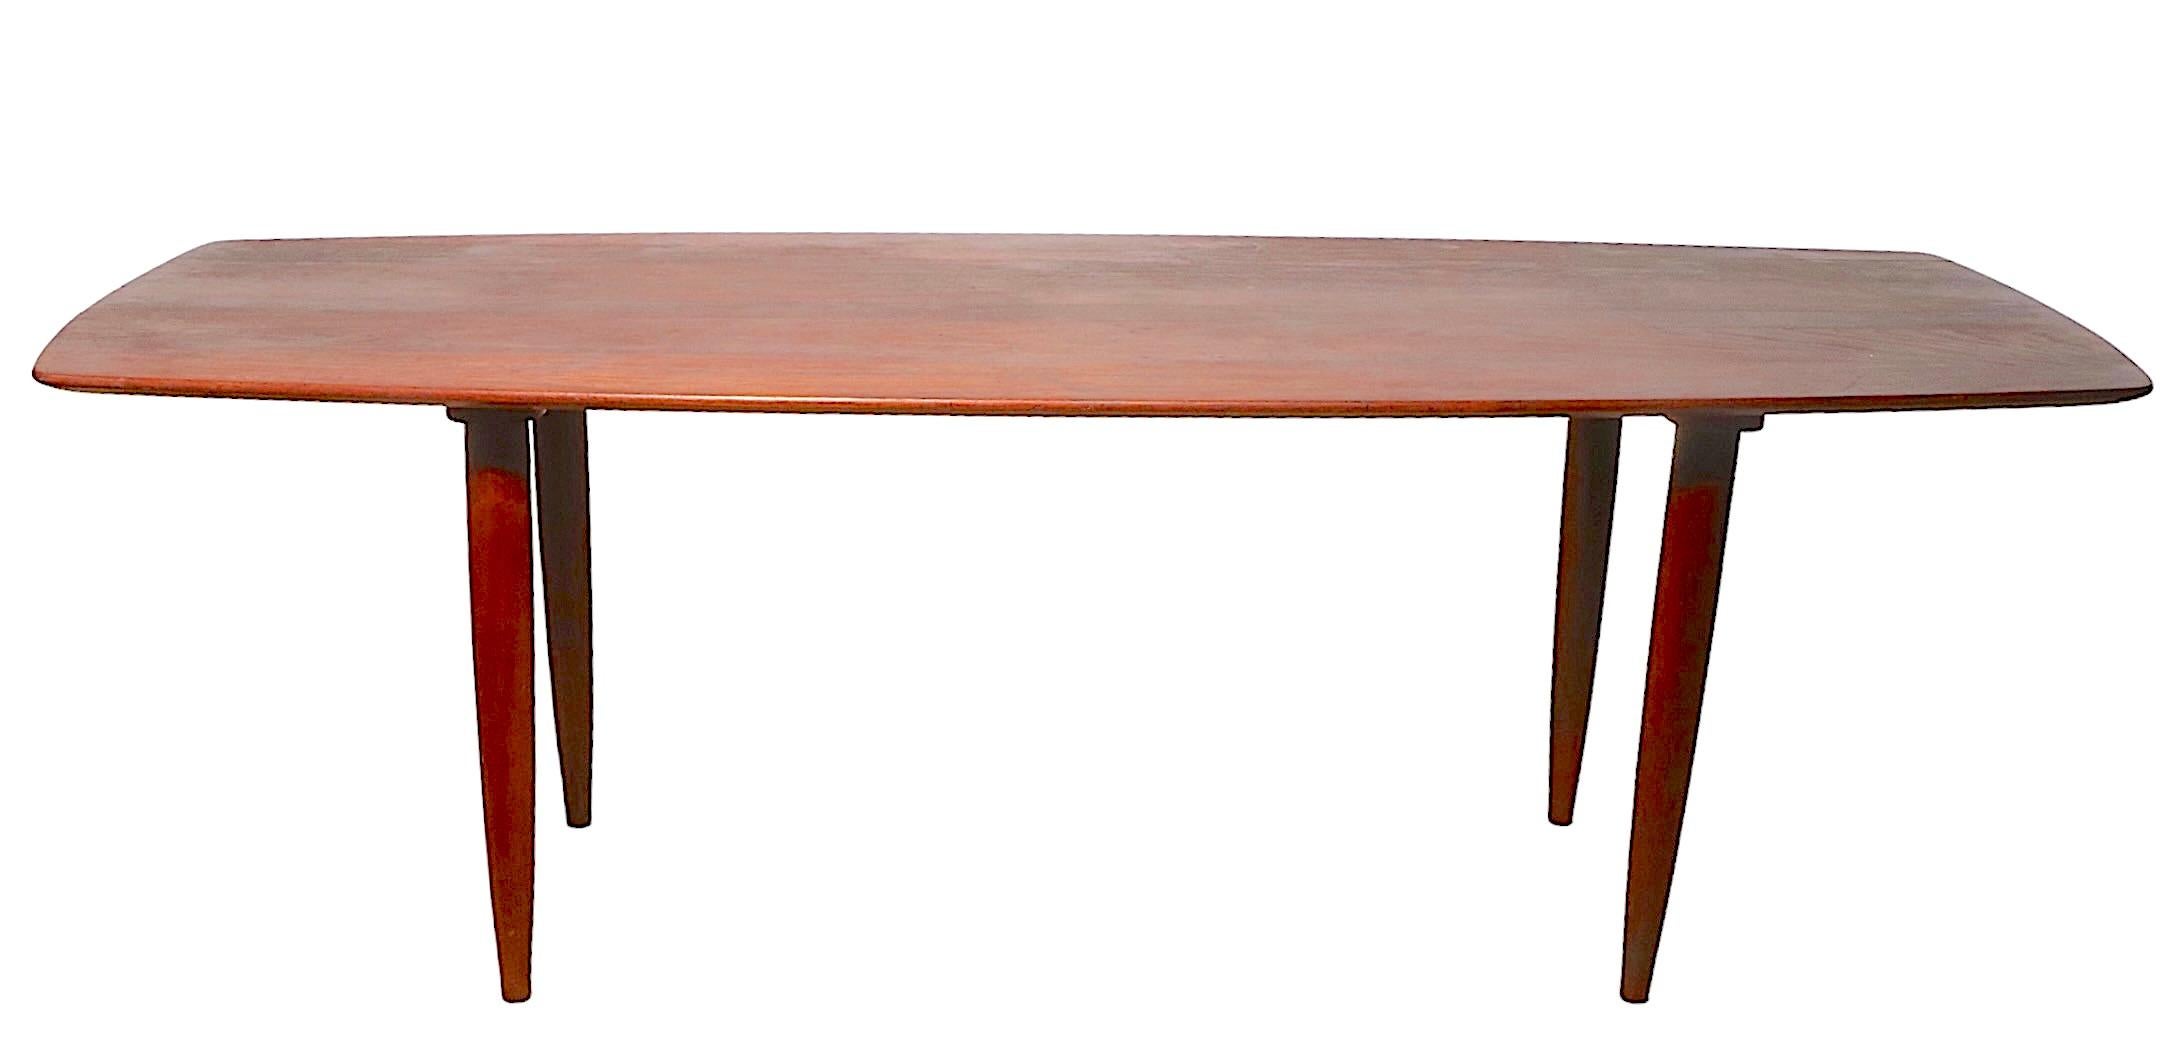 Walnut Mid Century Coffee Table Prelude by Ace Hi, c. 1950/1960's For Sale